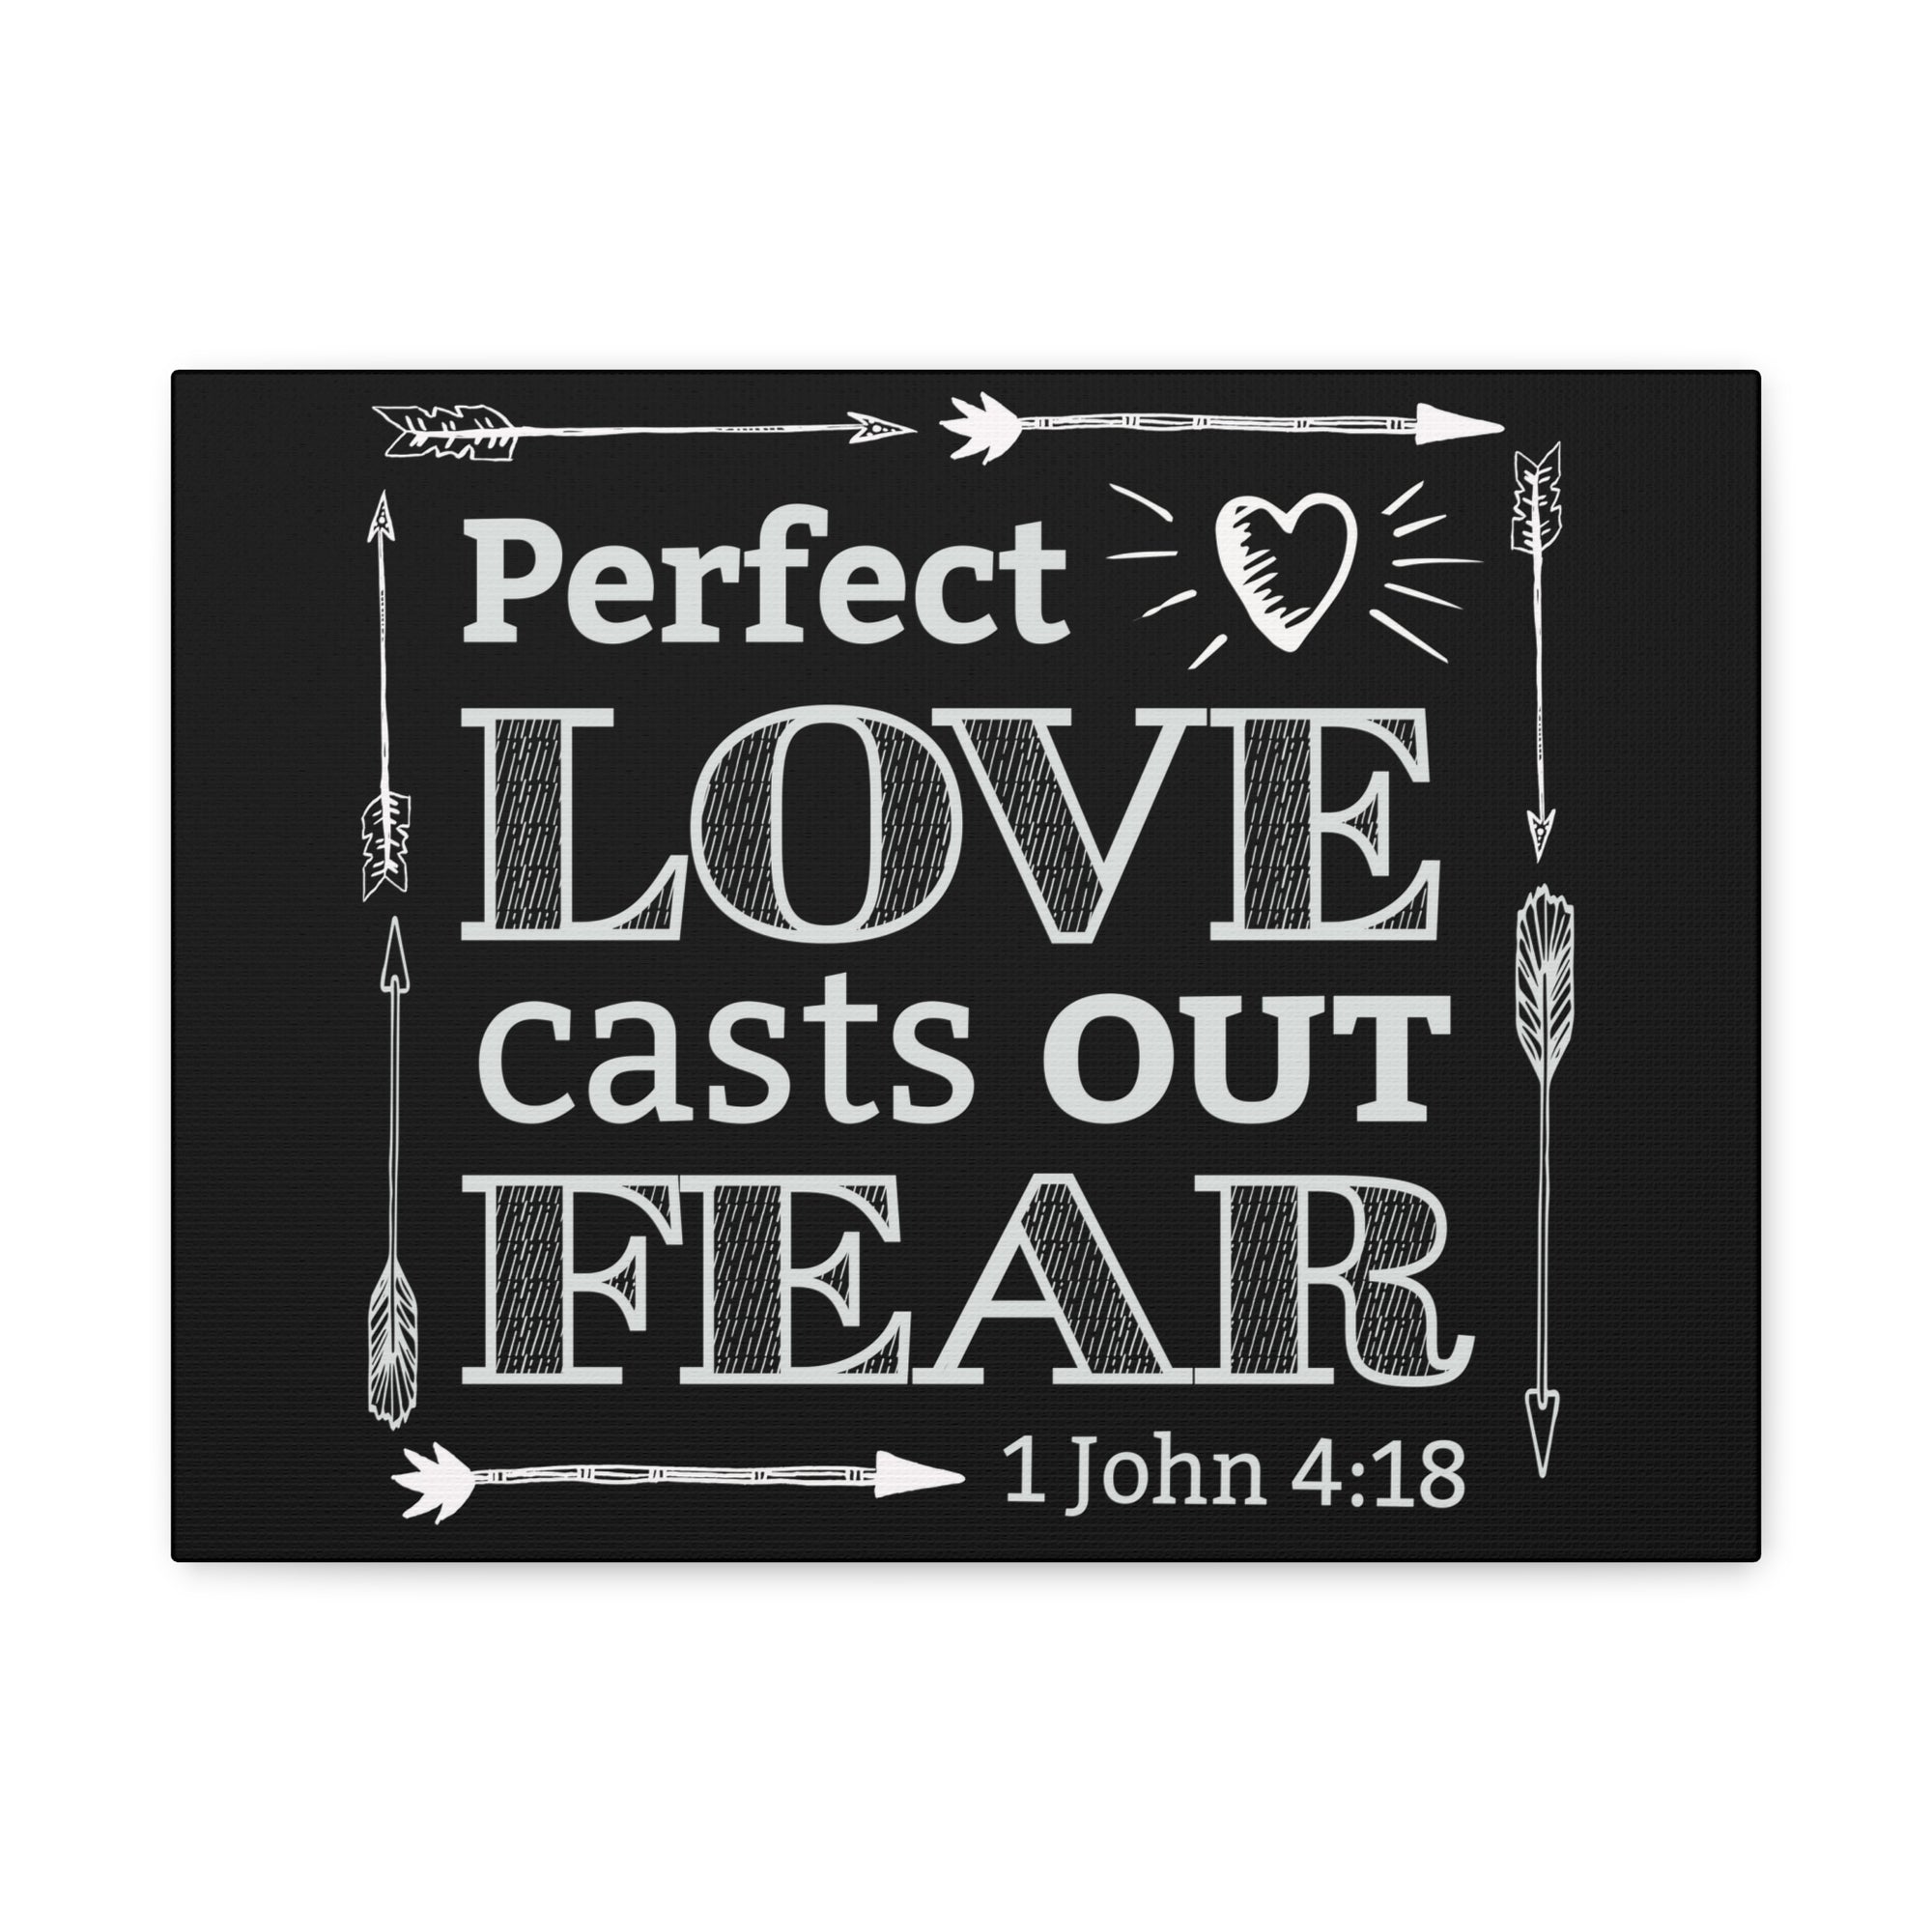 Scripture Walls Love Casts Out Fear 1 John 4:18 Bible Verse Canvas Christian Wall Art Ready to Hang-Express Your Love Gifts